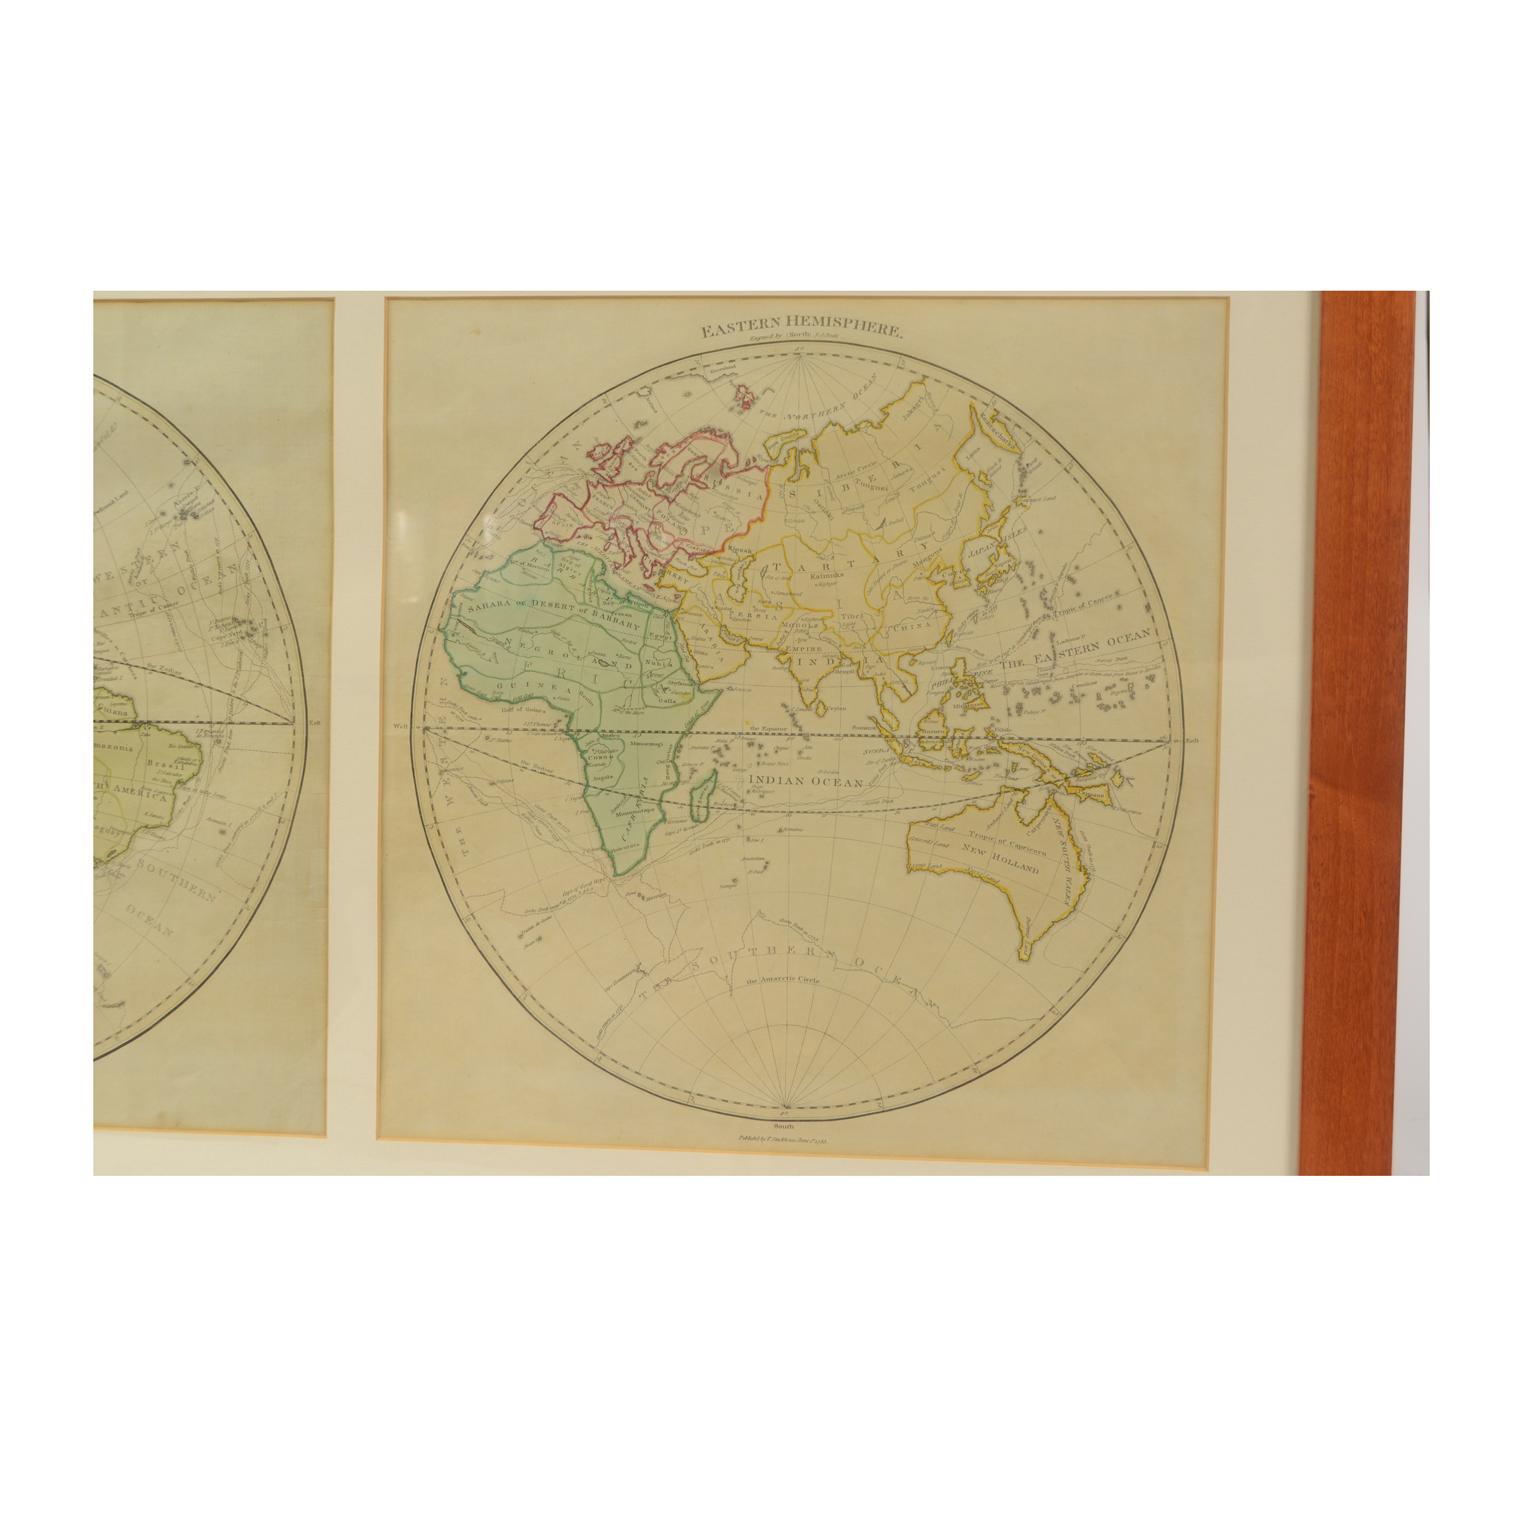 World map published in June 1783 by Stackhouse and engraved by S.J. Neele. It is a geographical map printed by engraving on a copper plate, coeval coloring, which depicts the entire earth's surface divided into two parts that correspond to the two